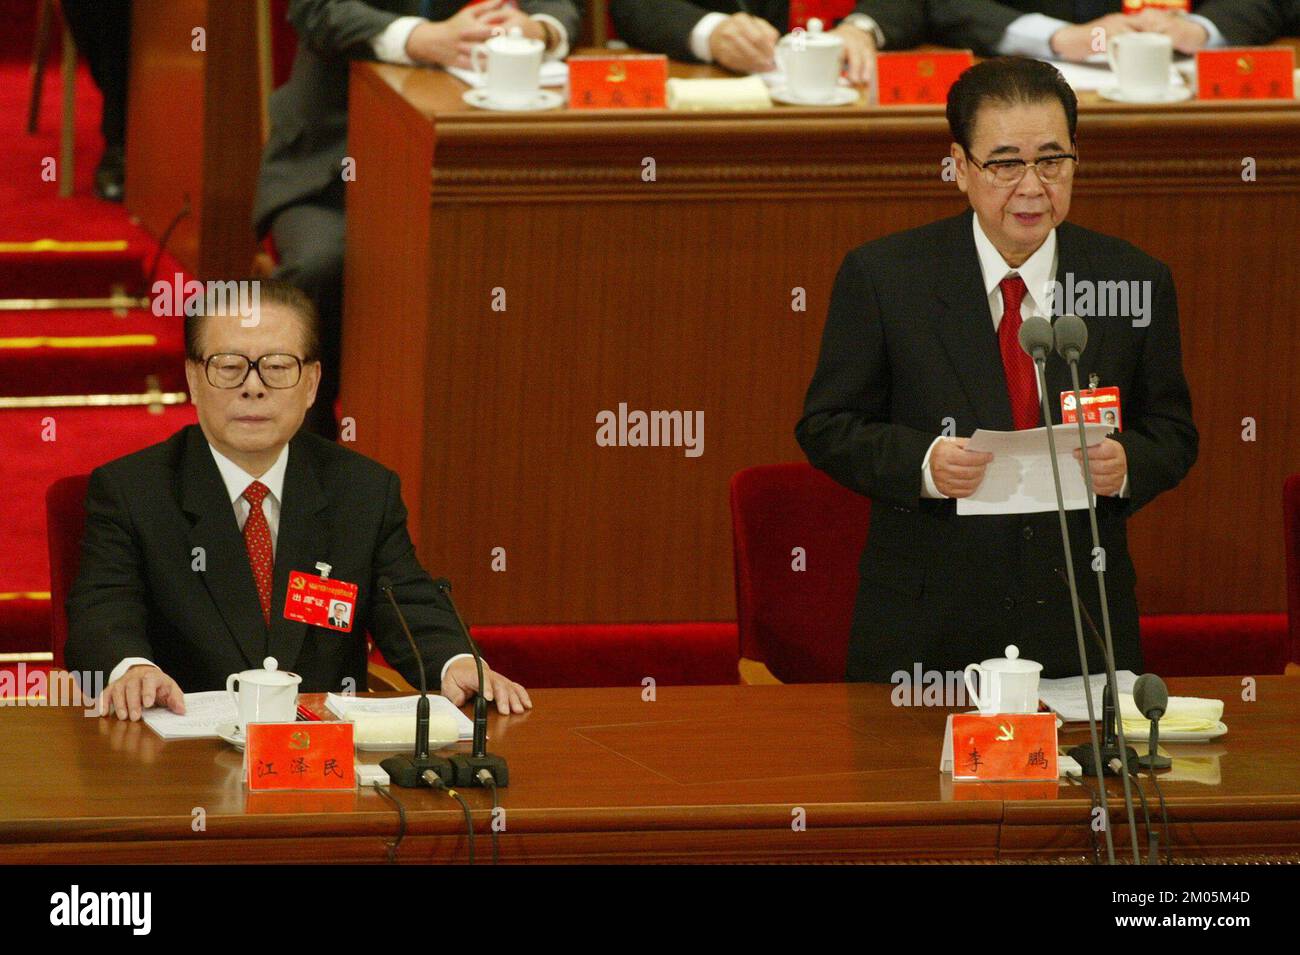 The Chinese President Jiang Zemin (L) listens as Chairman of the National People's Congress Mr Li Peng delivers a  speech on the opening day of the China's 16th Communist Party Congress at the Great Hall of the People in Beijing, China. 08 November 2002  ***NOT FOR ADVERTISING USE*** Stock Photo